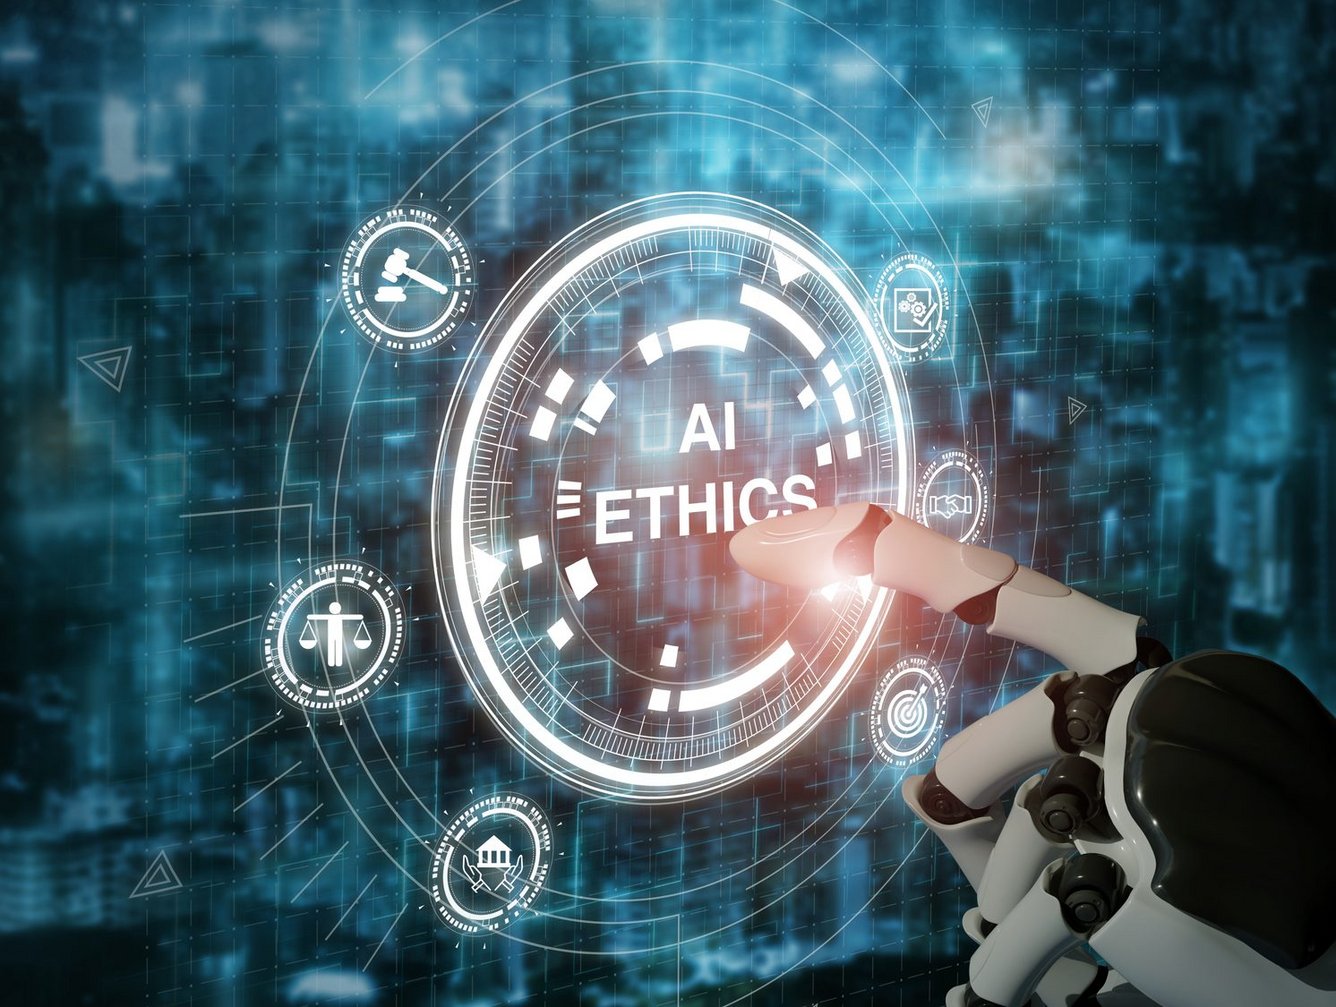 How can companies use AI ethically?